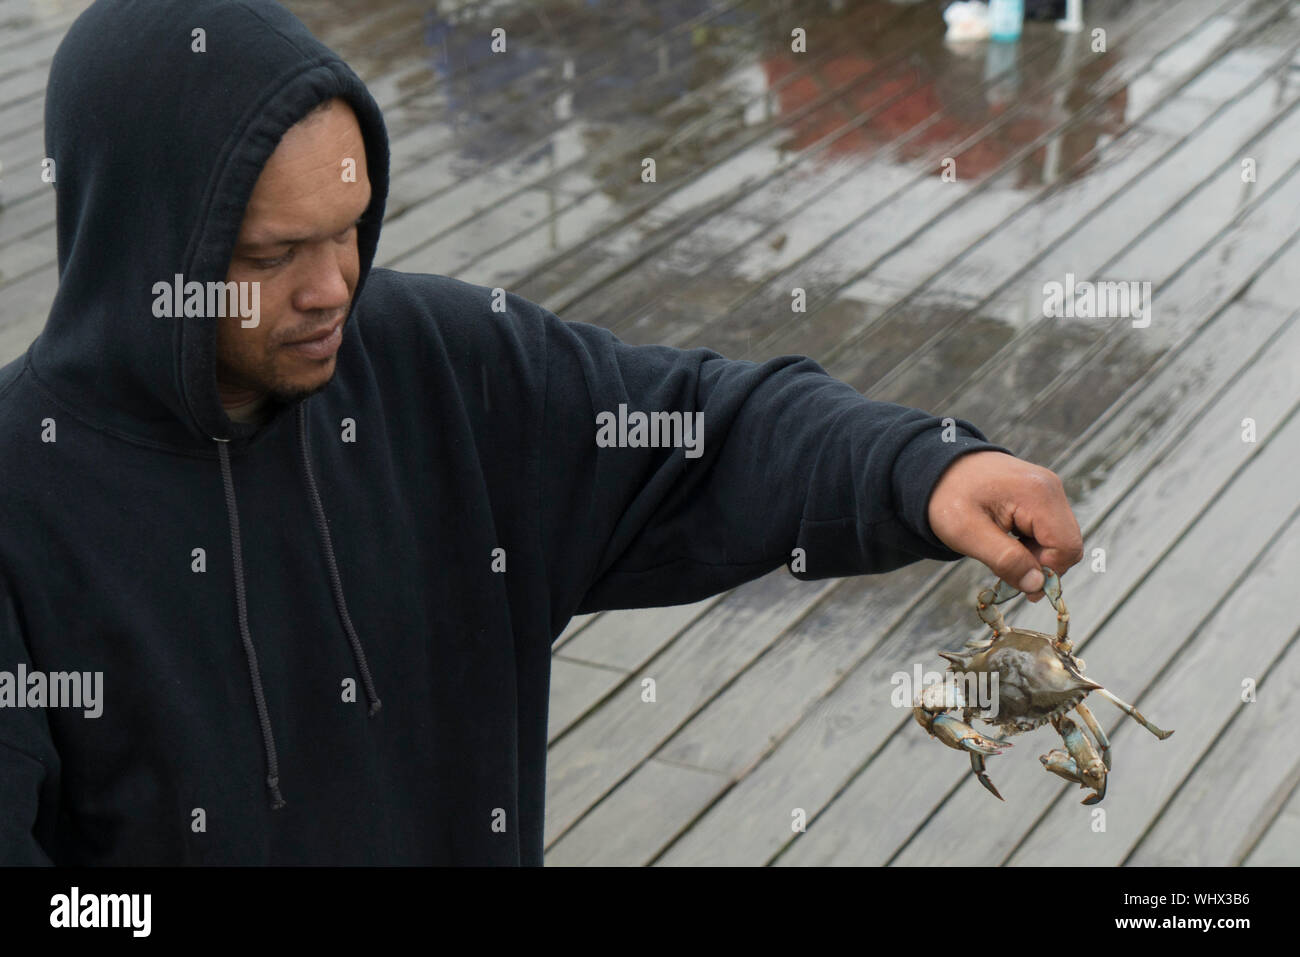 A fisherman holding a blue crab that he just caught in the Hudson River at Bear Mountain in the Hudson Highlands region of New York State. Stock Photo